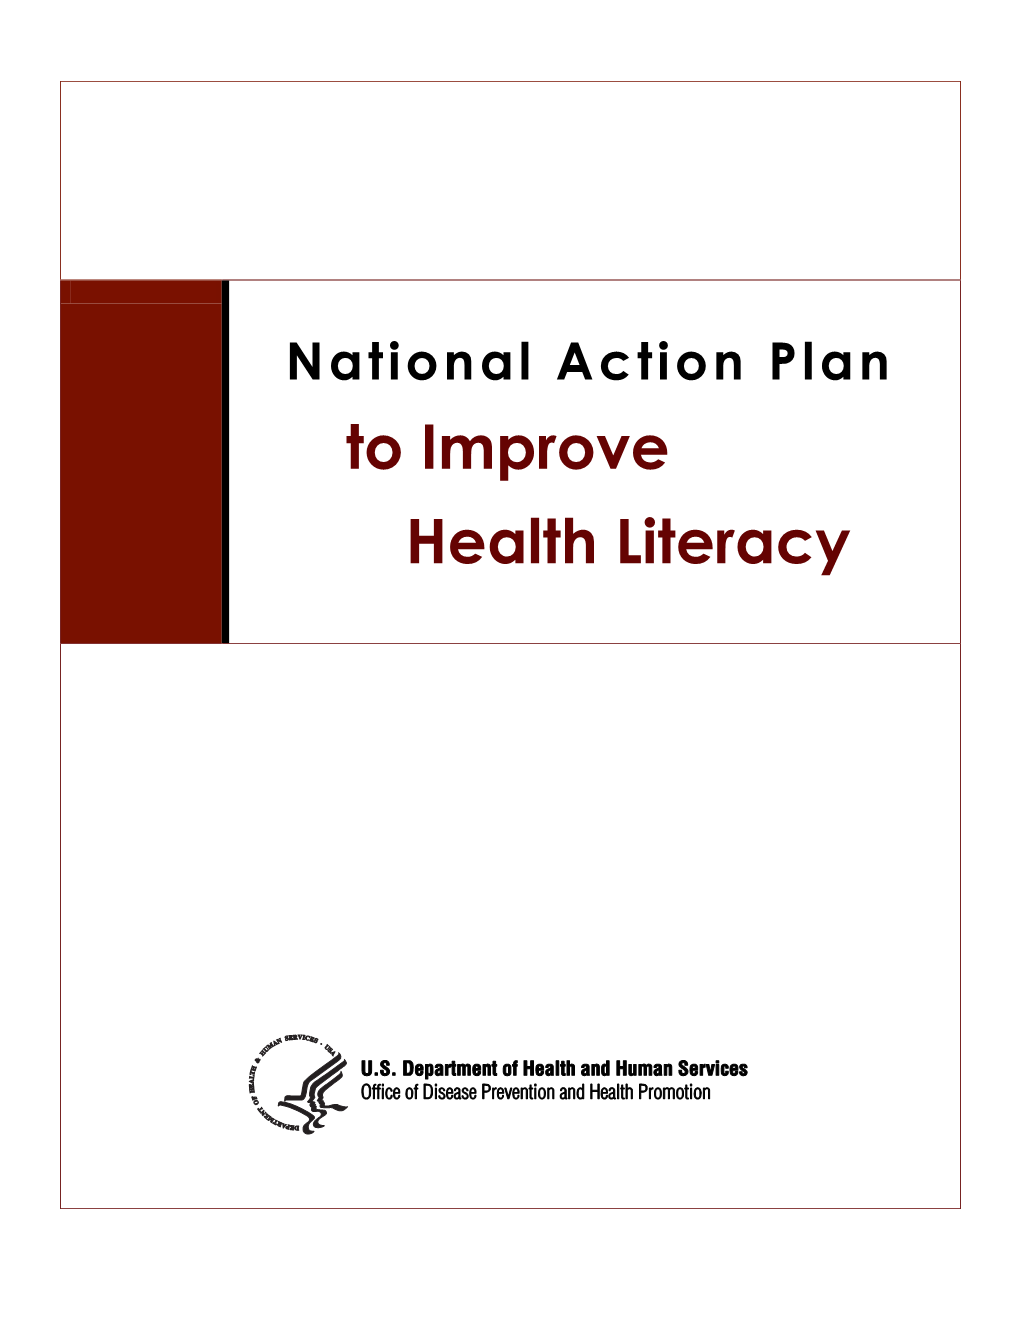 National Action Plan to Improve Health Literacy